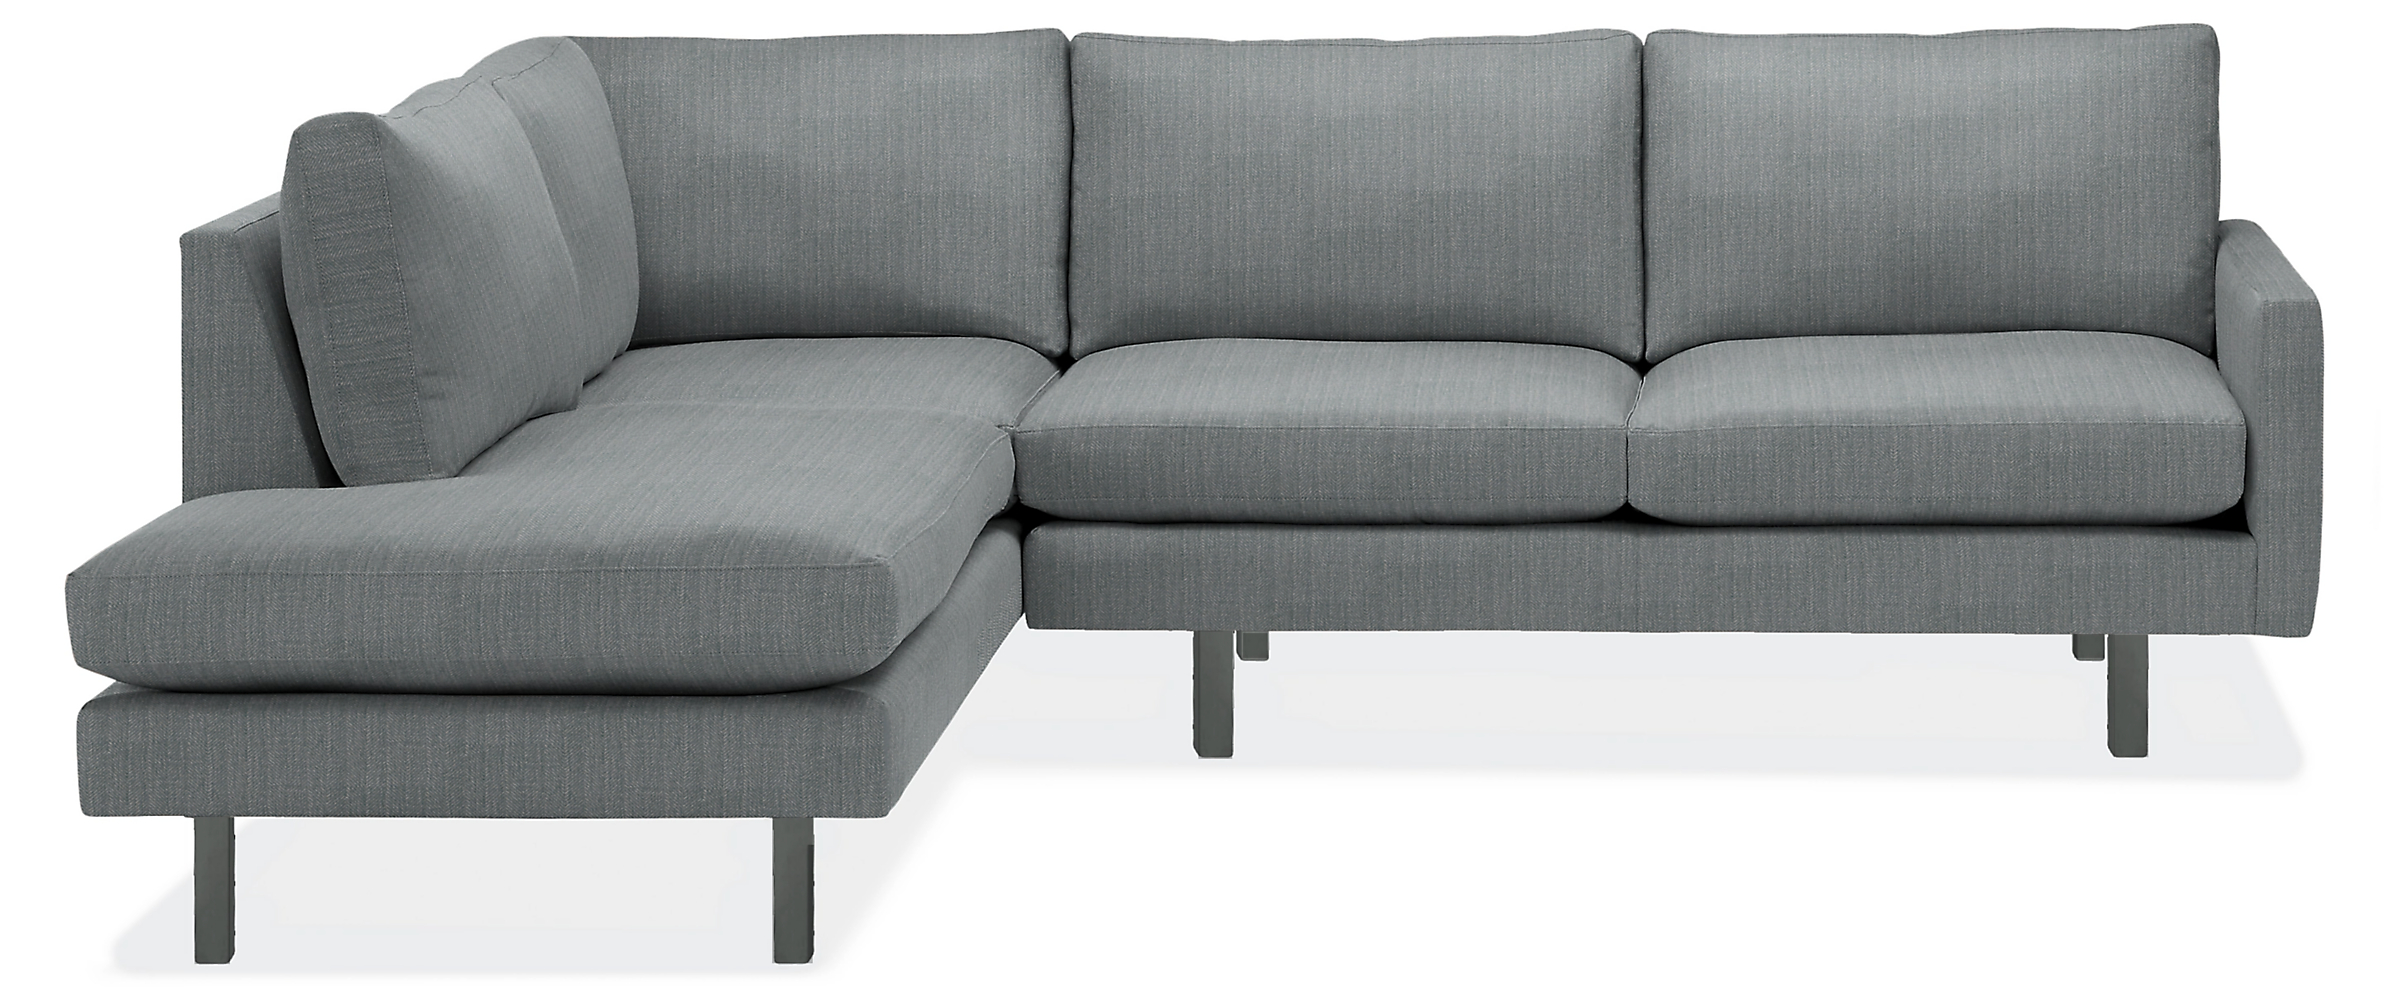 Jasper 103x87" Sofa with Left-Corner Chaise in Frond Slate with Graphite Legs